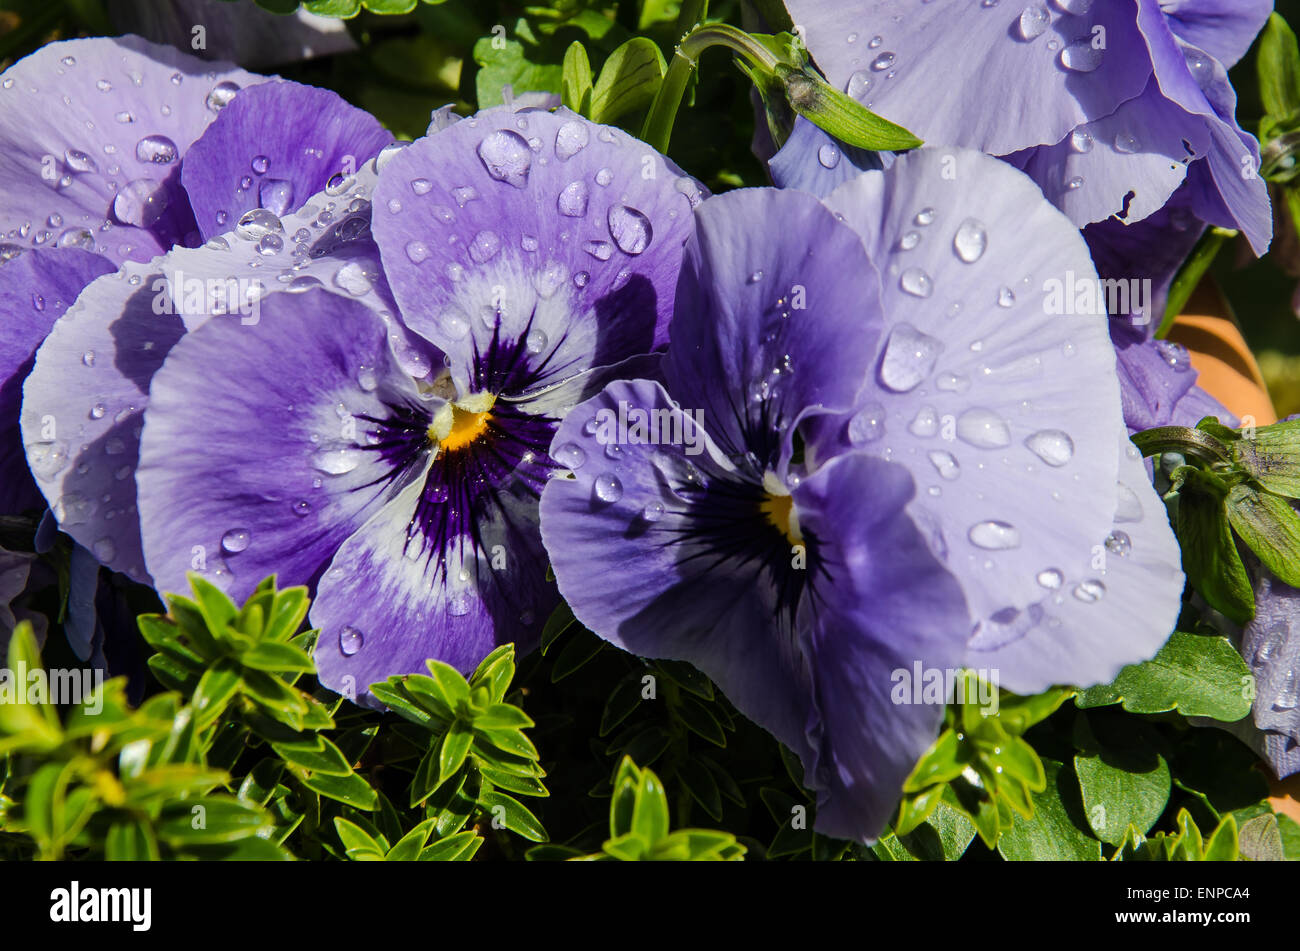 Growing pansies will provide year-round blooms in your garden. These dainty, delicate flowers include winter-flowering bedding Stock Photo